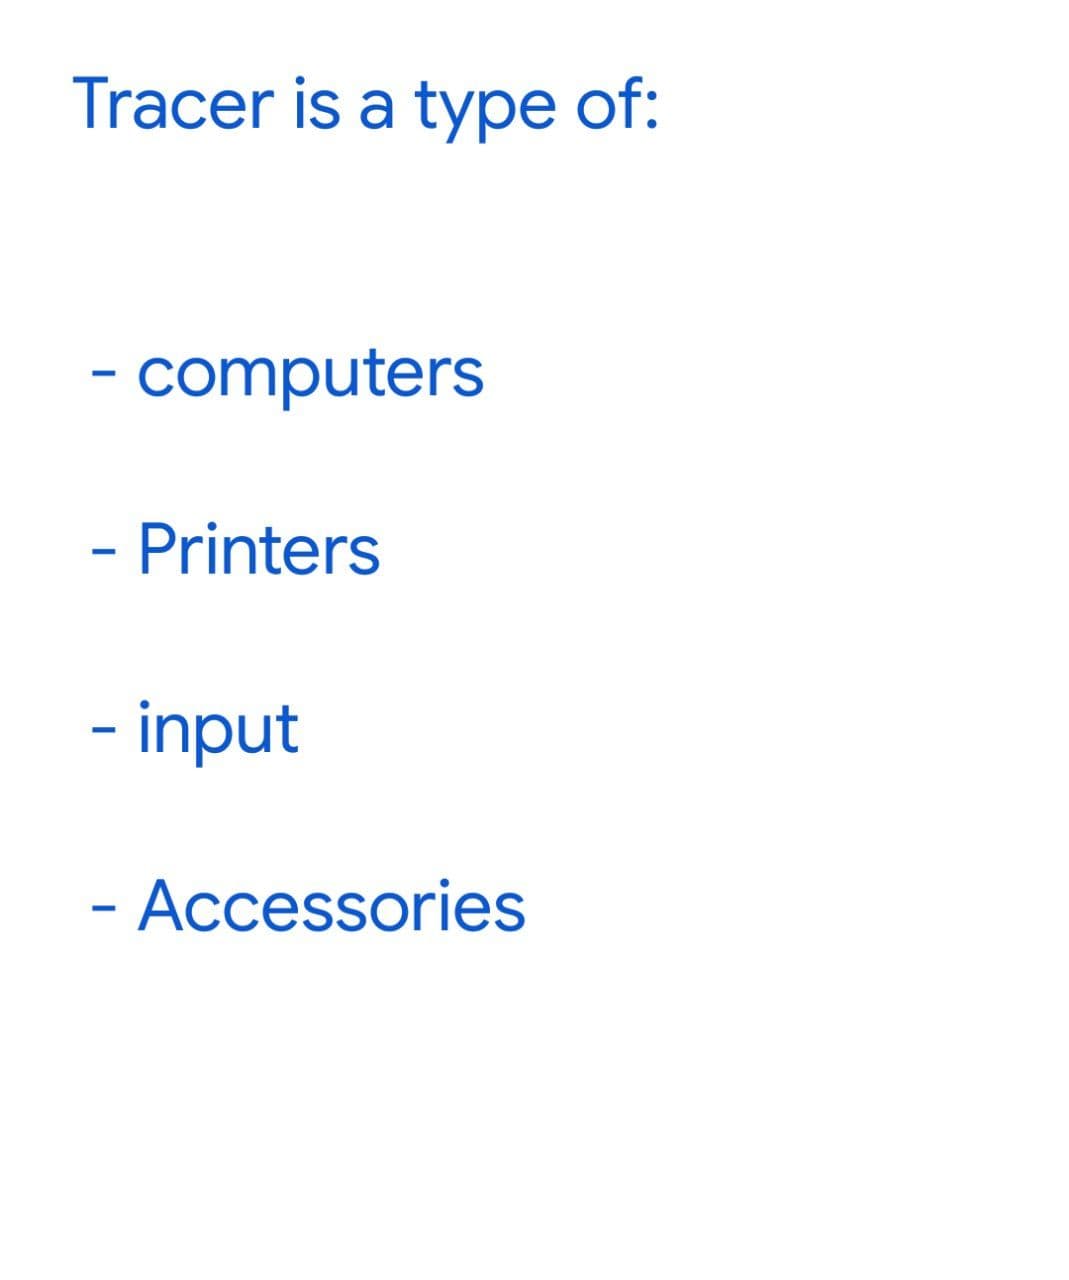 Tracer is a type of:
- computers
- Printers
- input
- Accessories